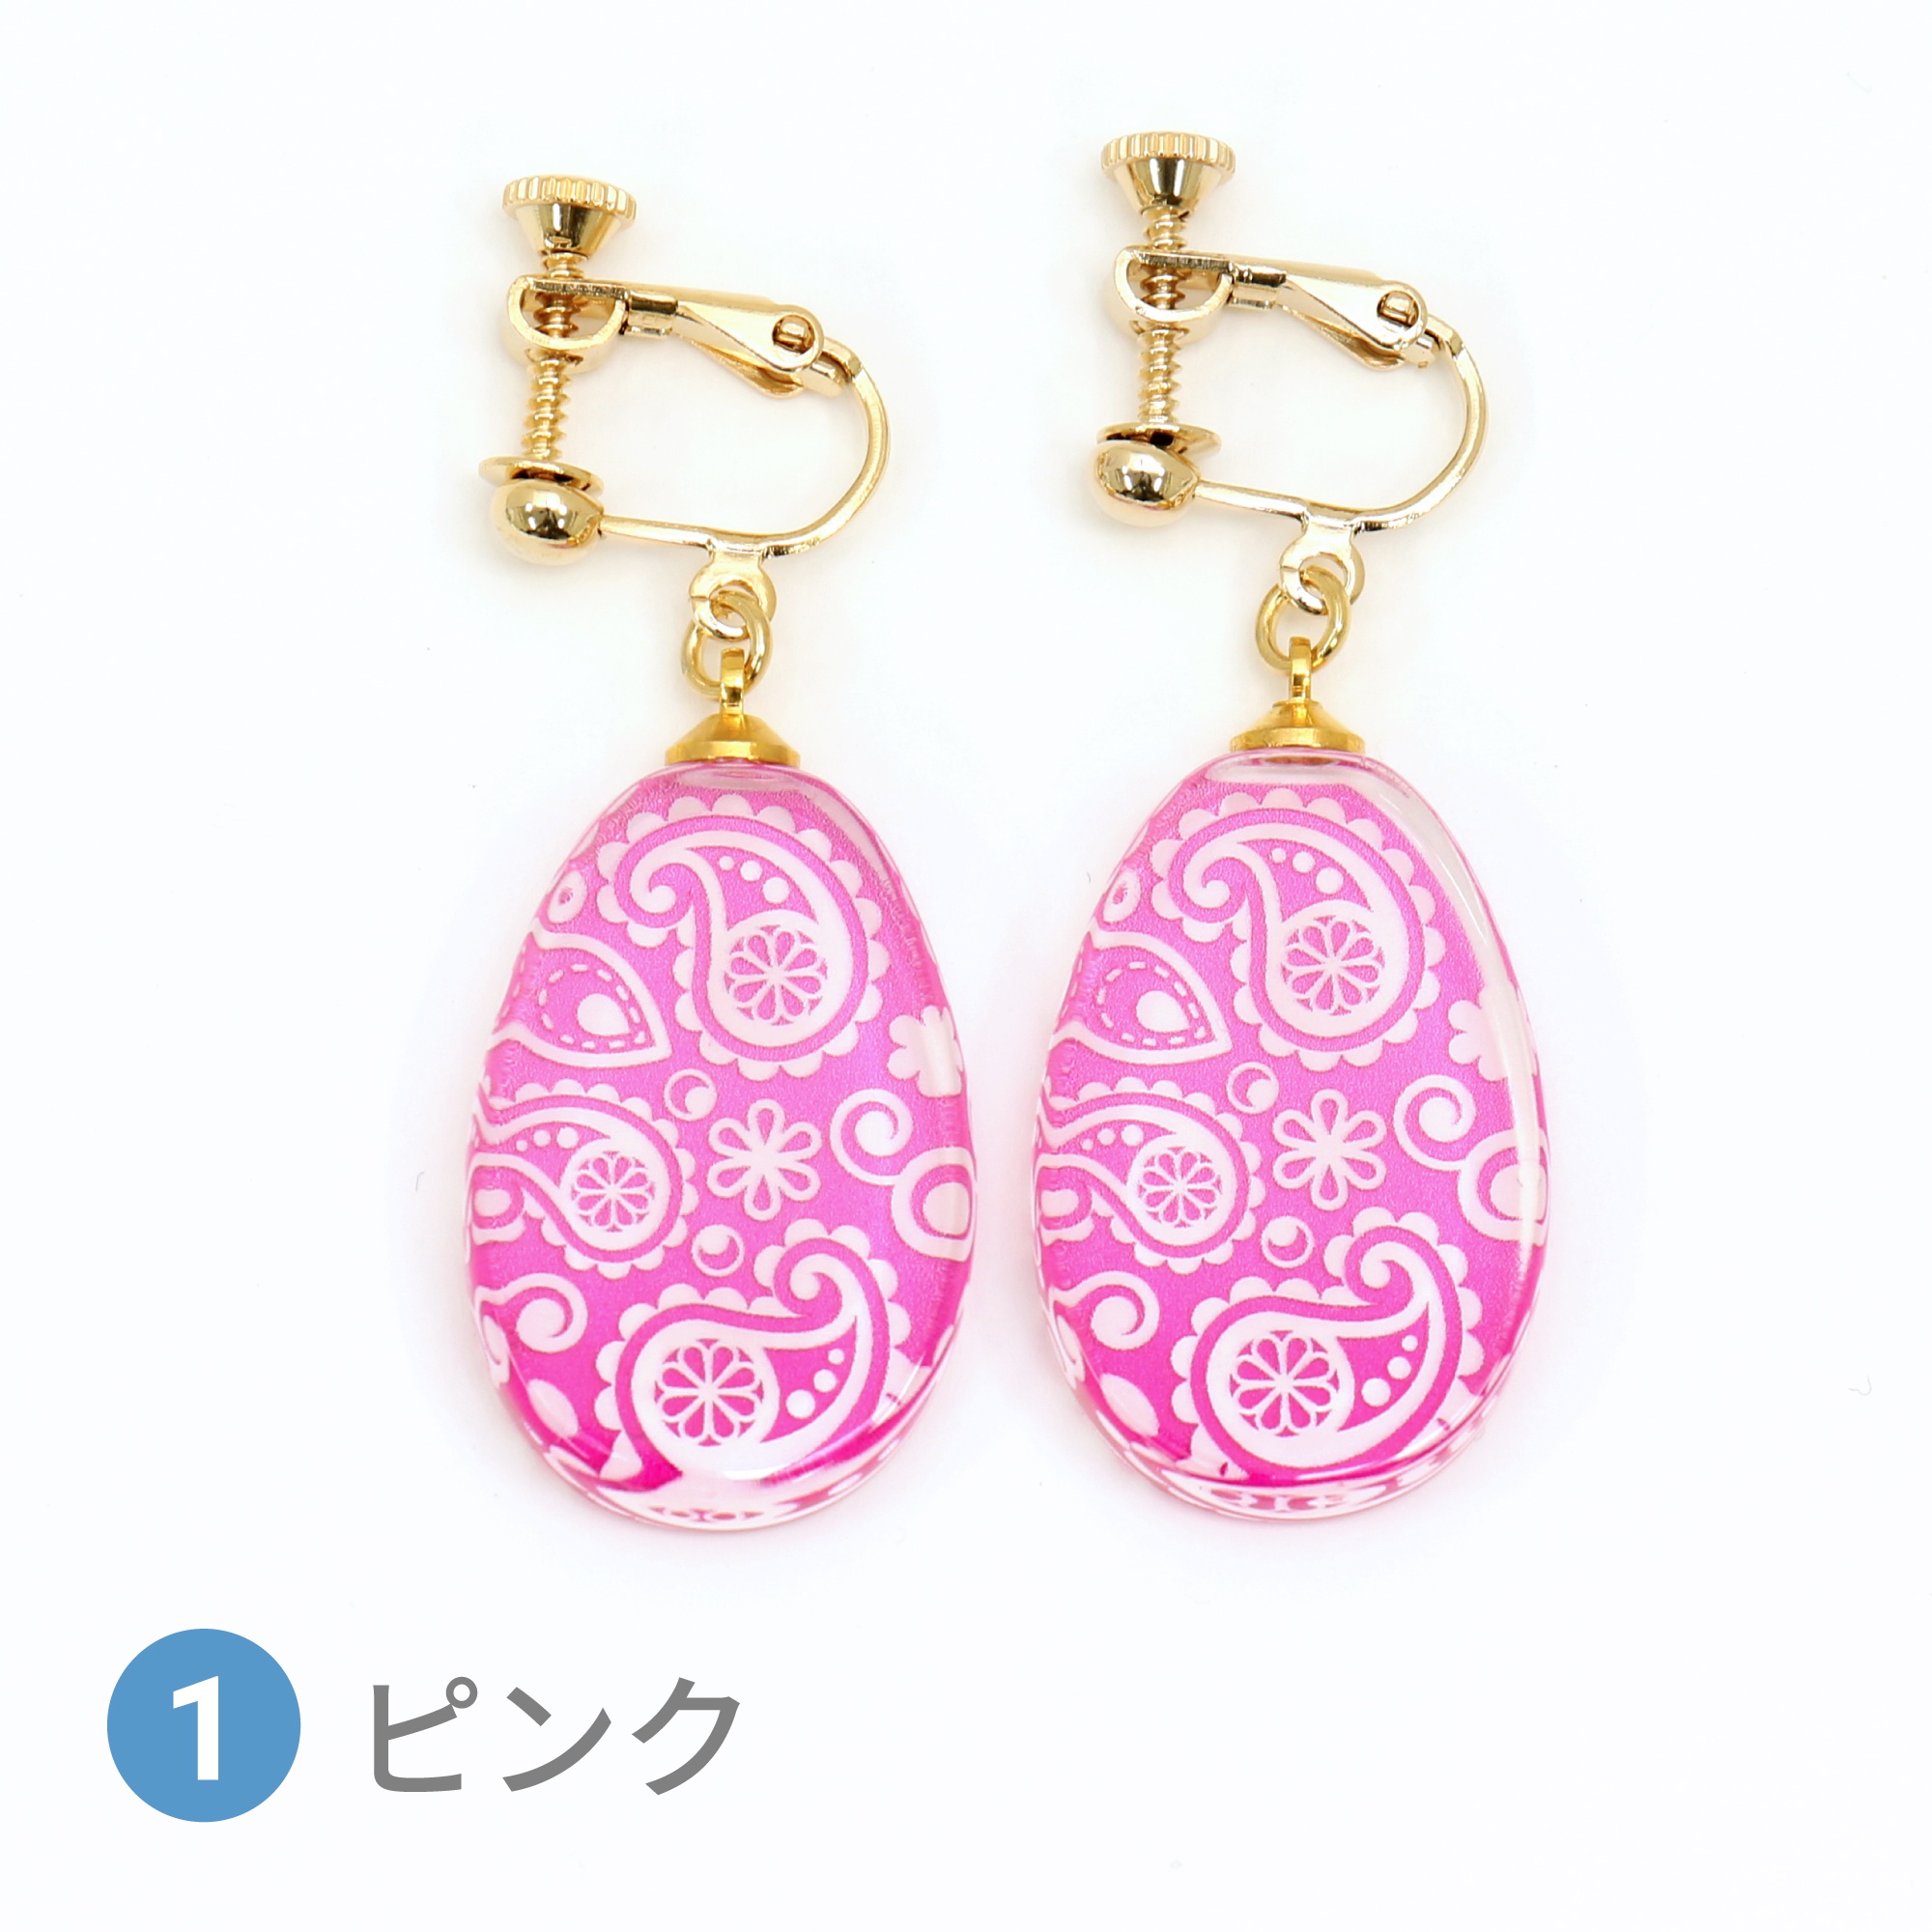 Glass accessories Earring PAISLEY pink drop shape